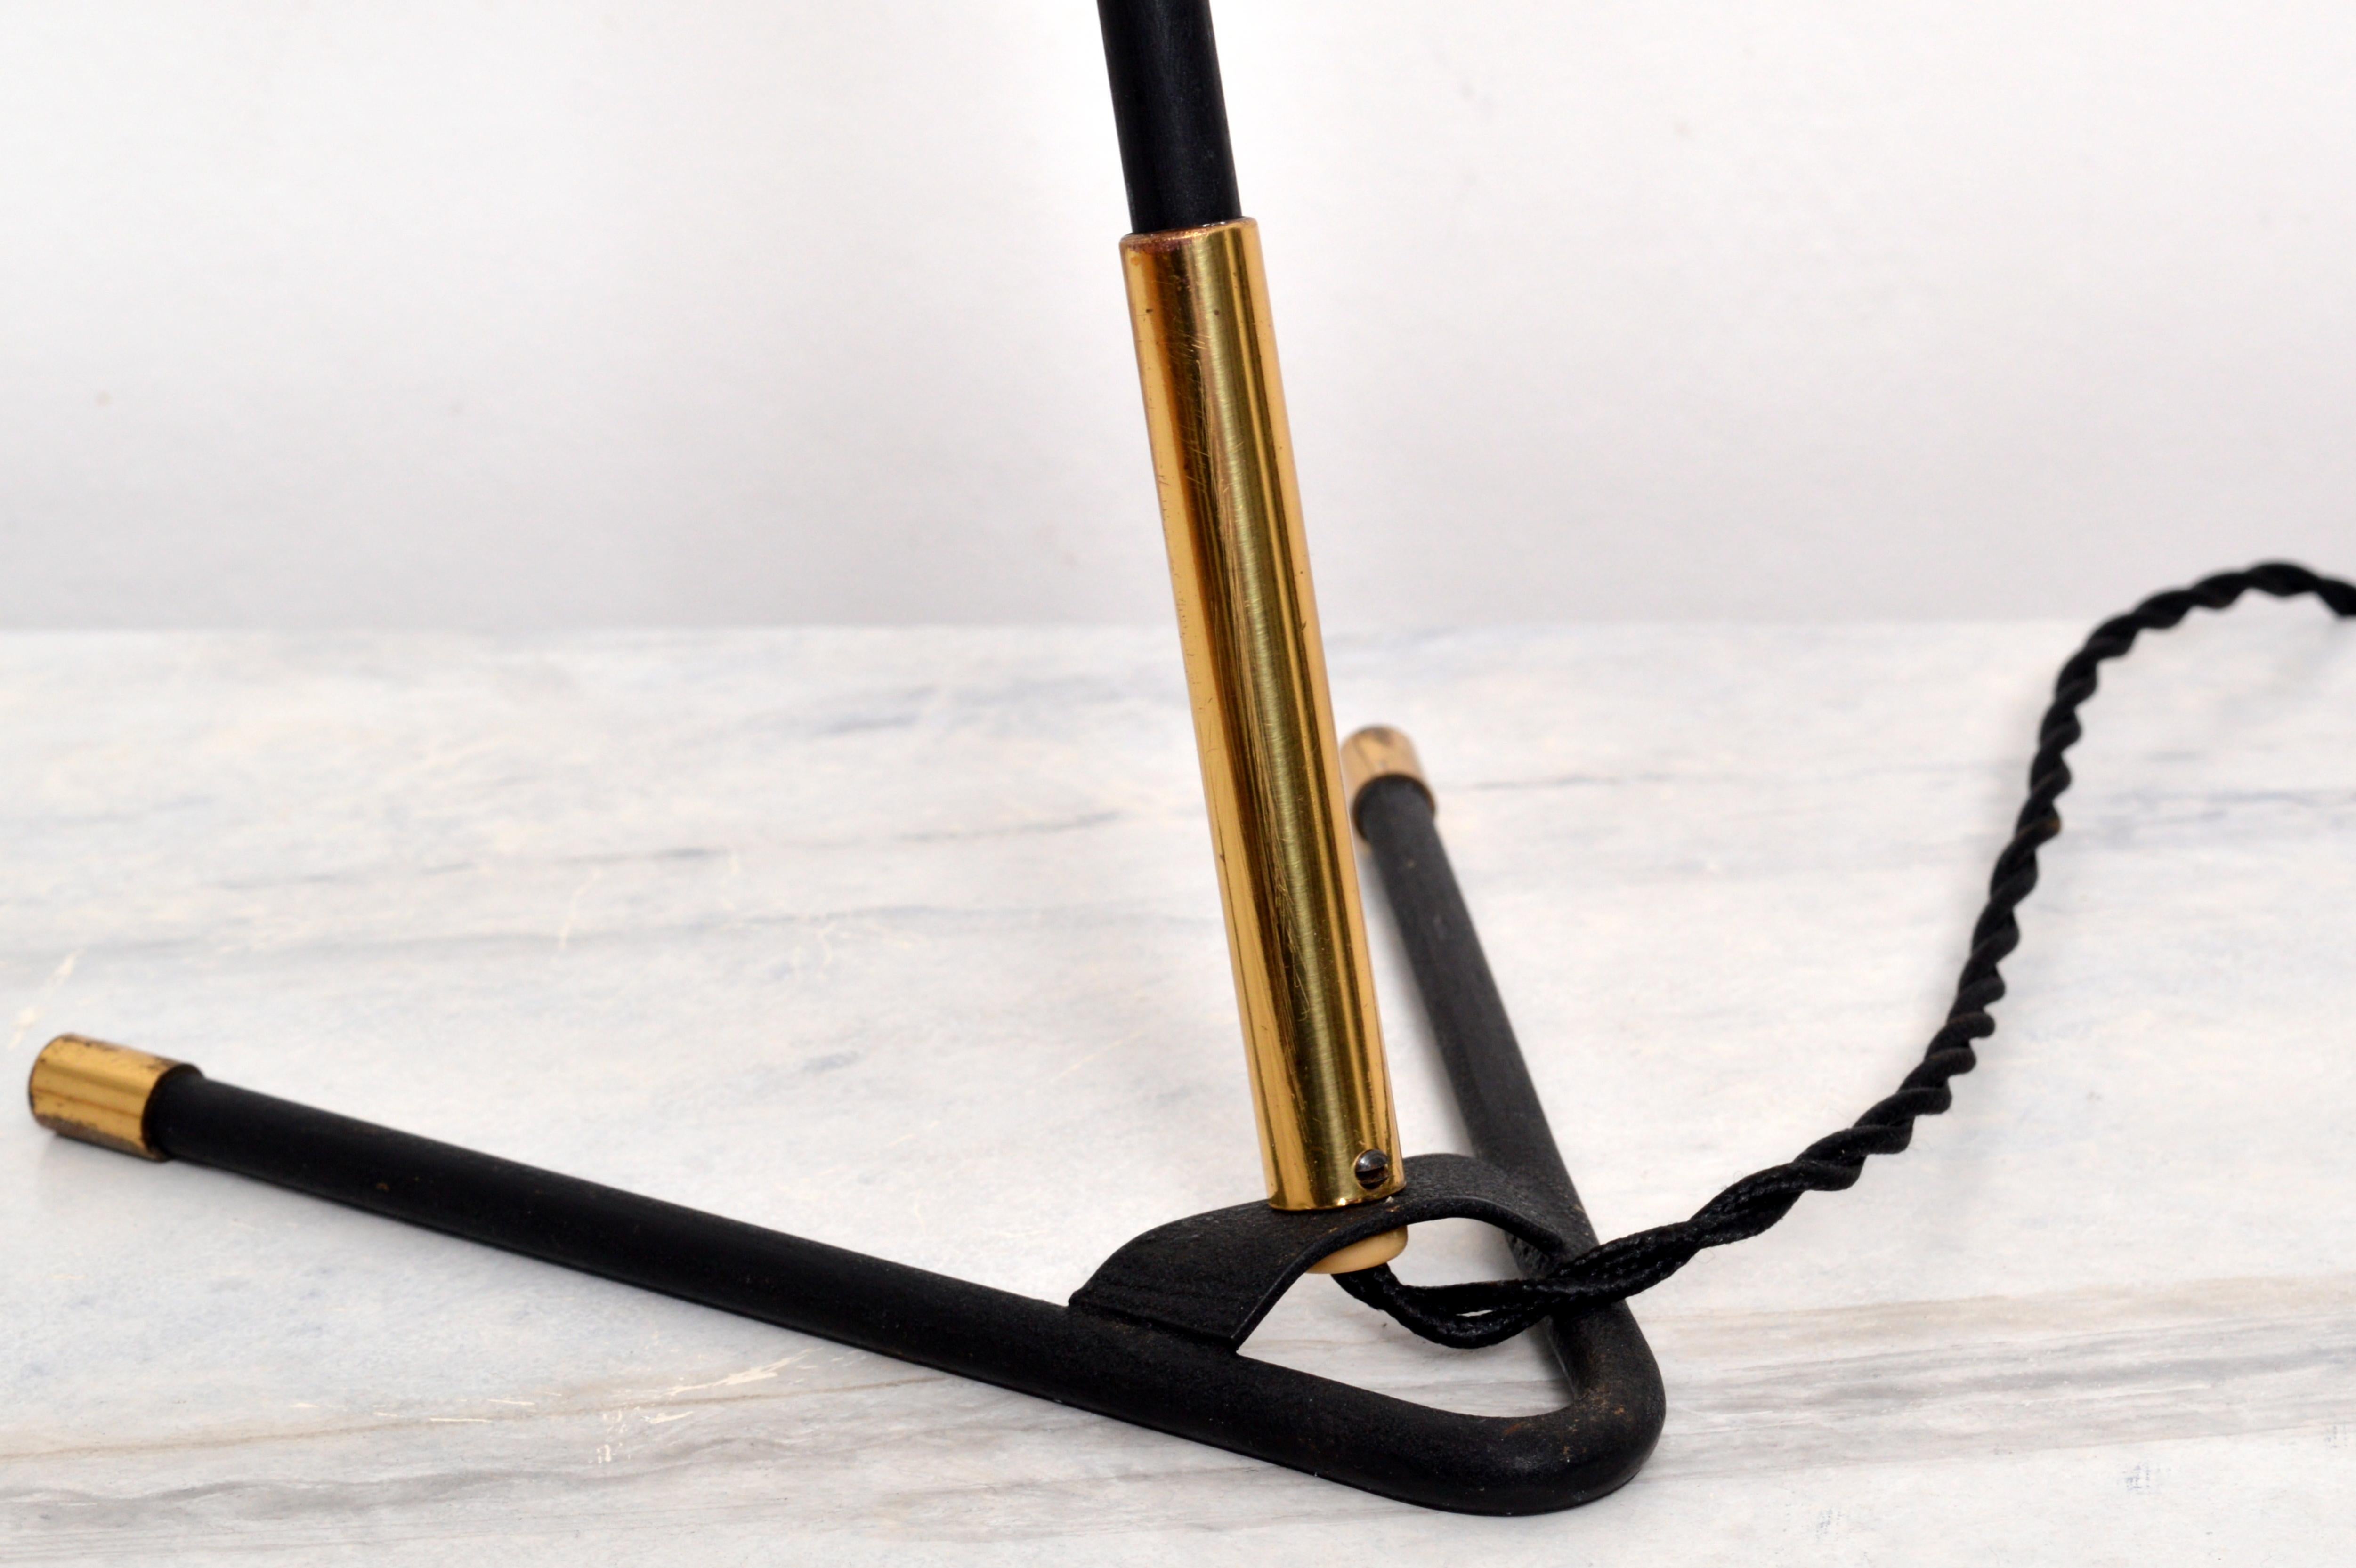 Mid-Century Modern Table Lamp in Black and Brass by Boréns, Sweden, 1950s For Sale 2